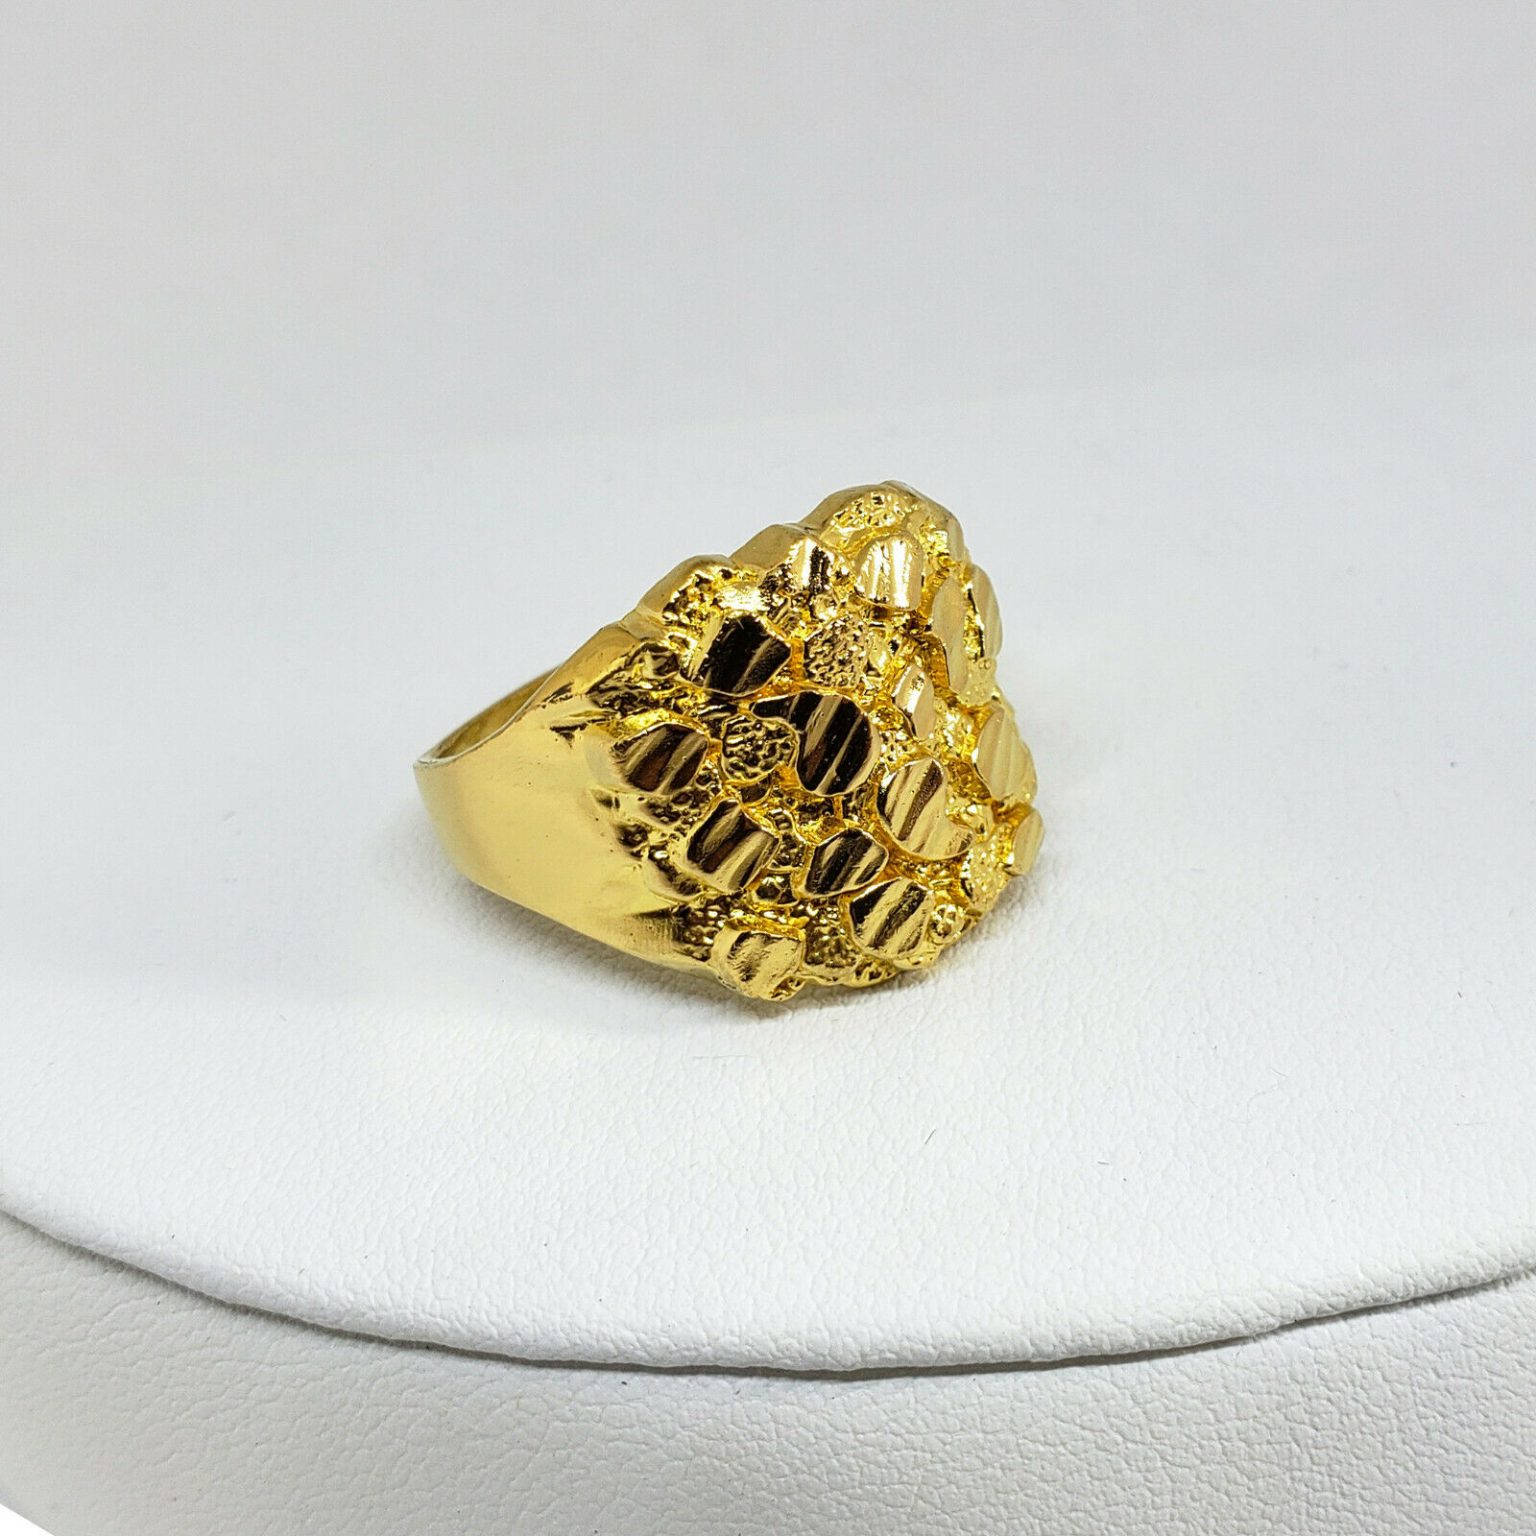 Solid 24K Yellow Gold Extra Large Diamond Cut Mens Nugget Ring, Size 5